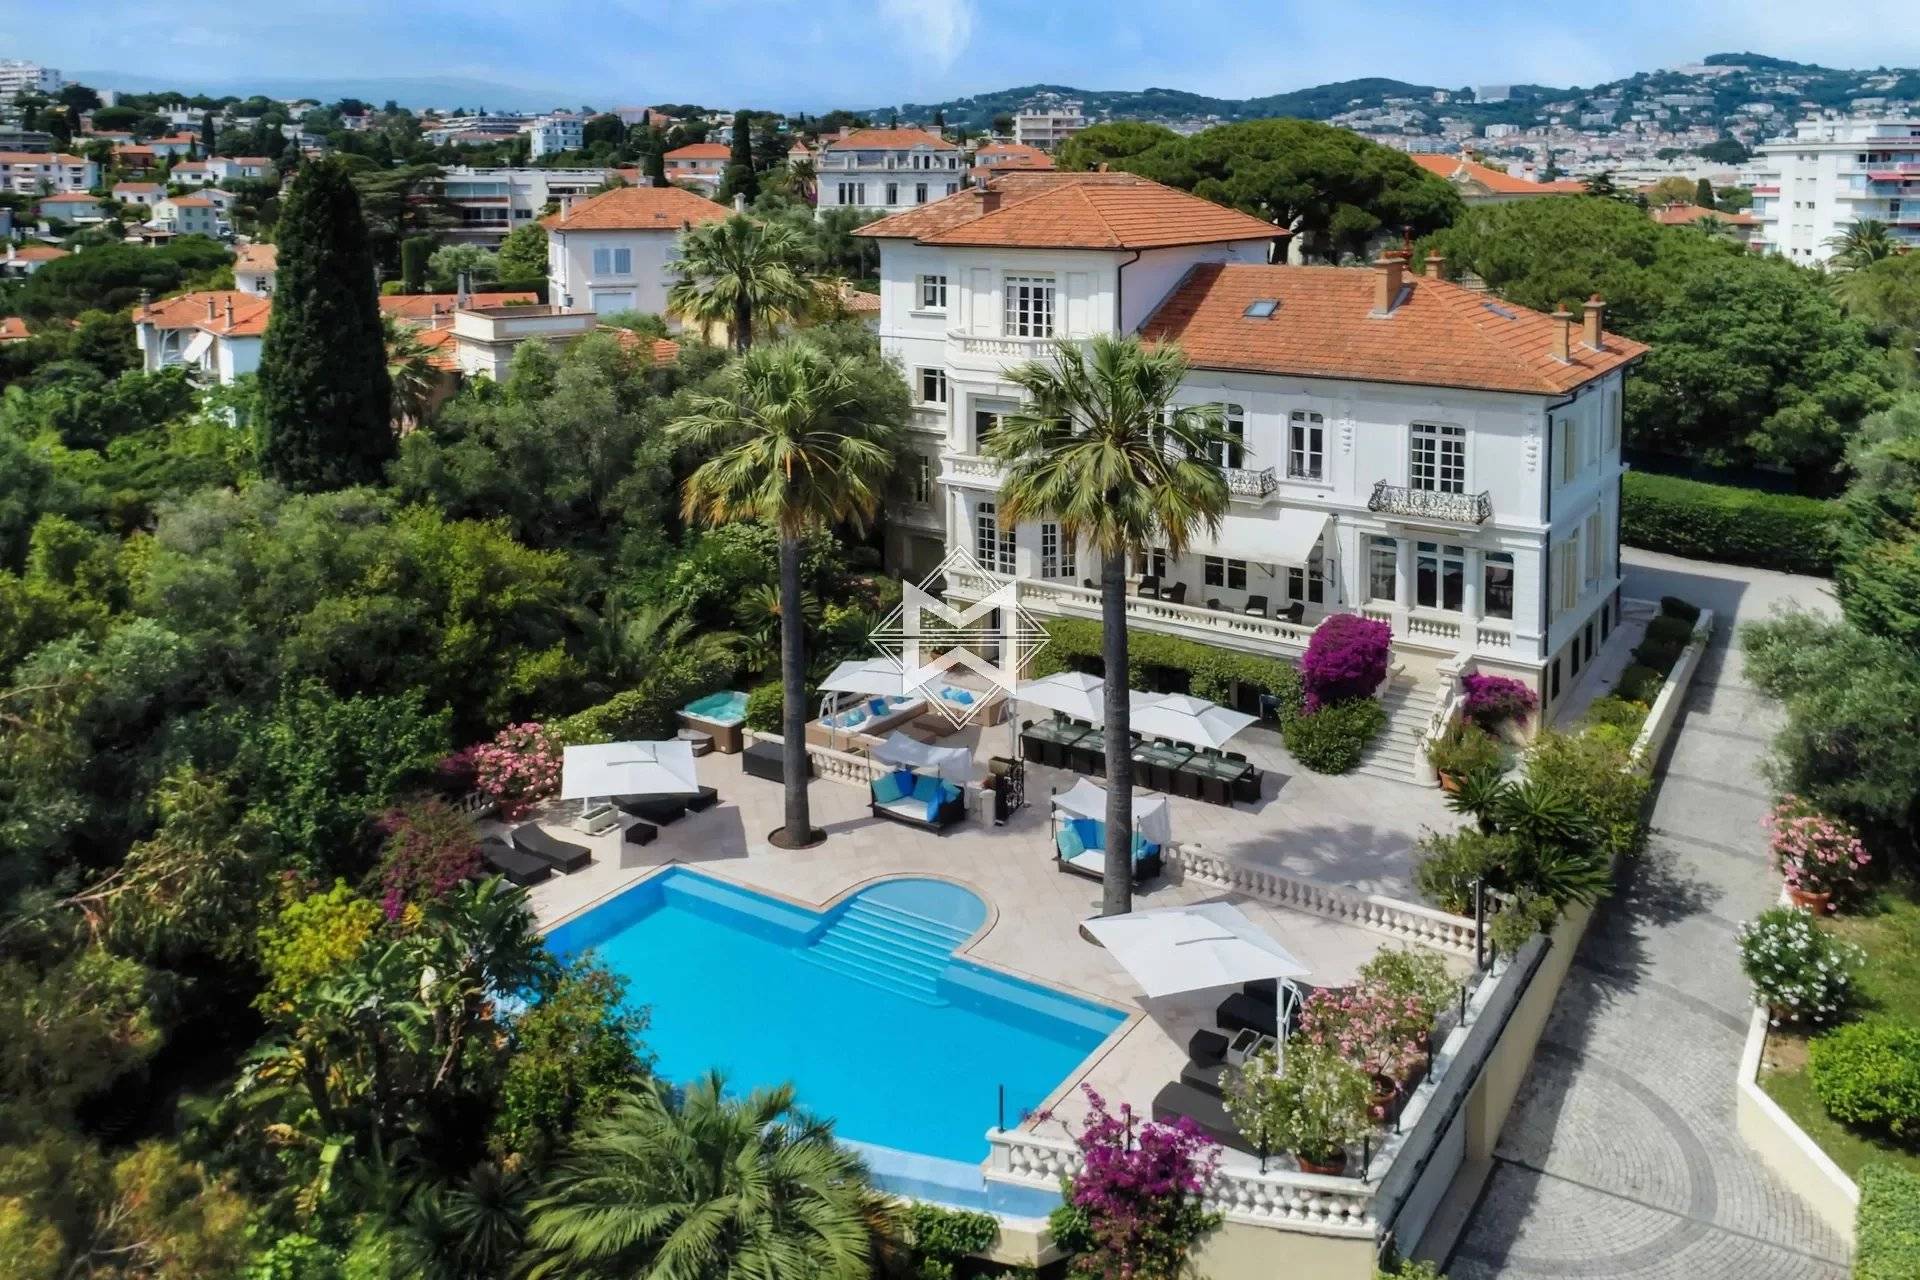 CANNES - Sensational property a few minutes from the Croisette